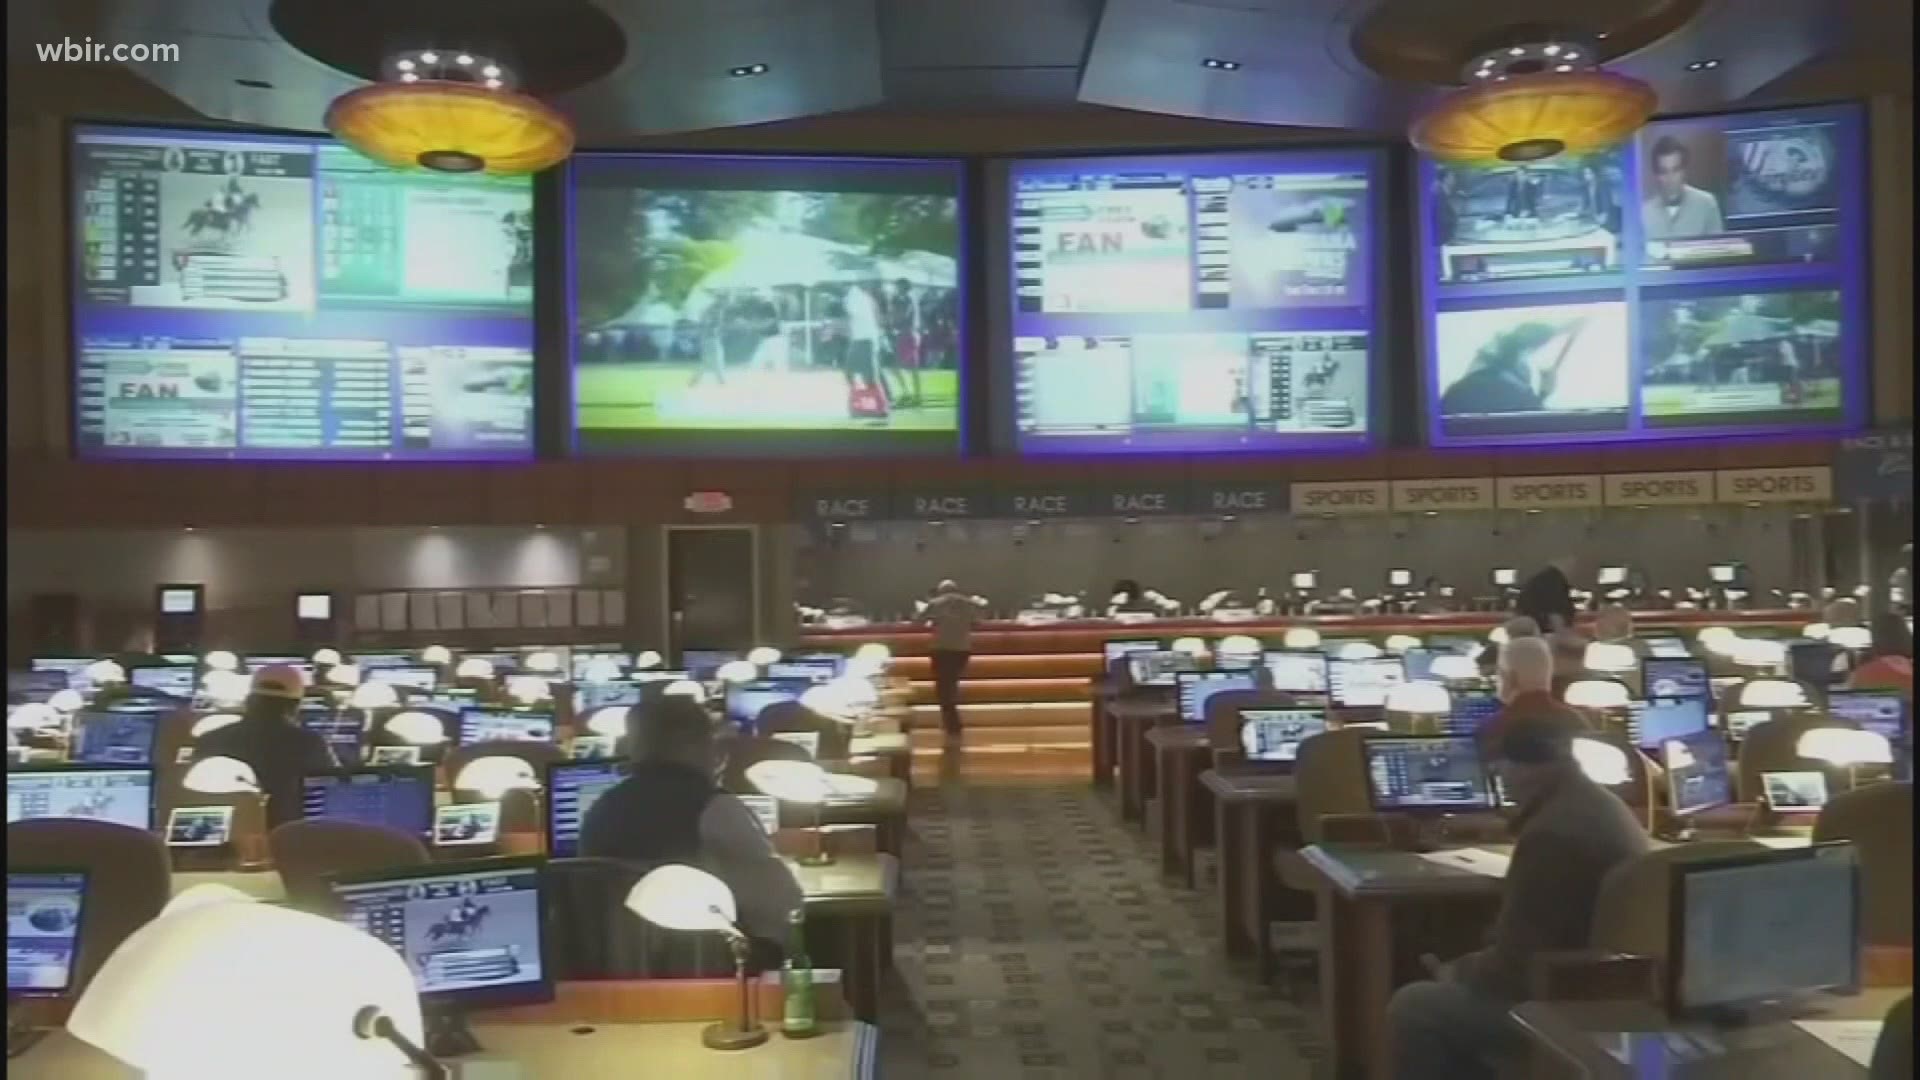 Online sports betting will start soon in Tennessee.